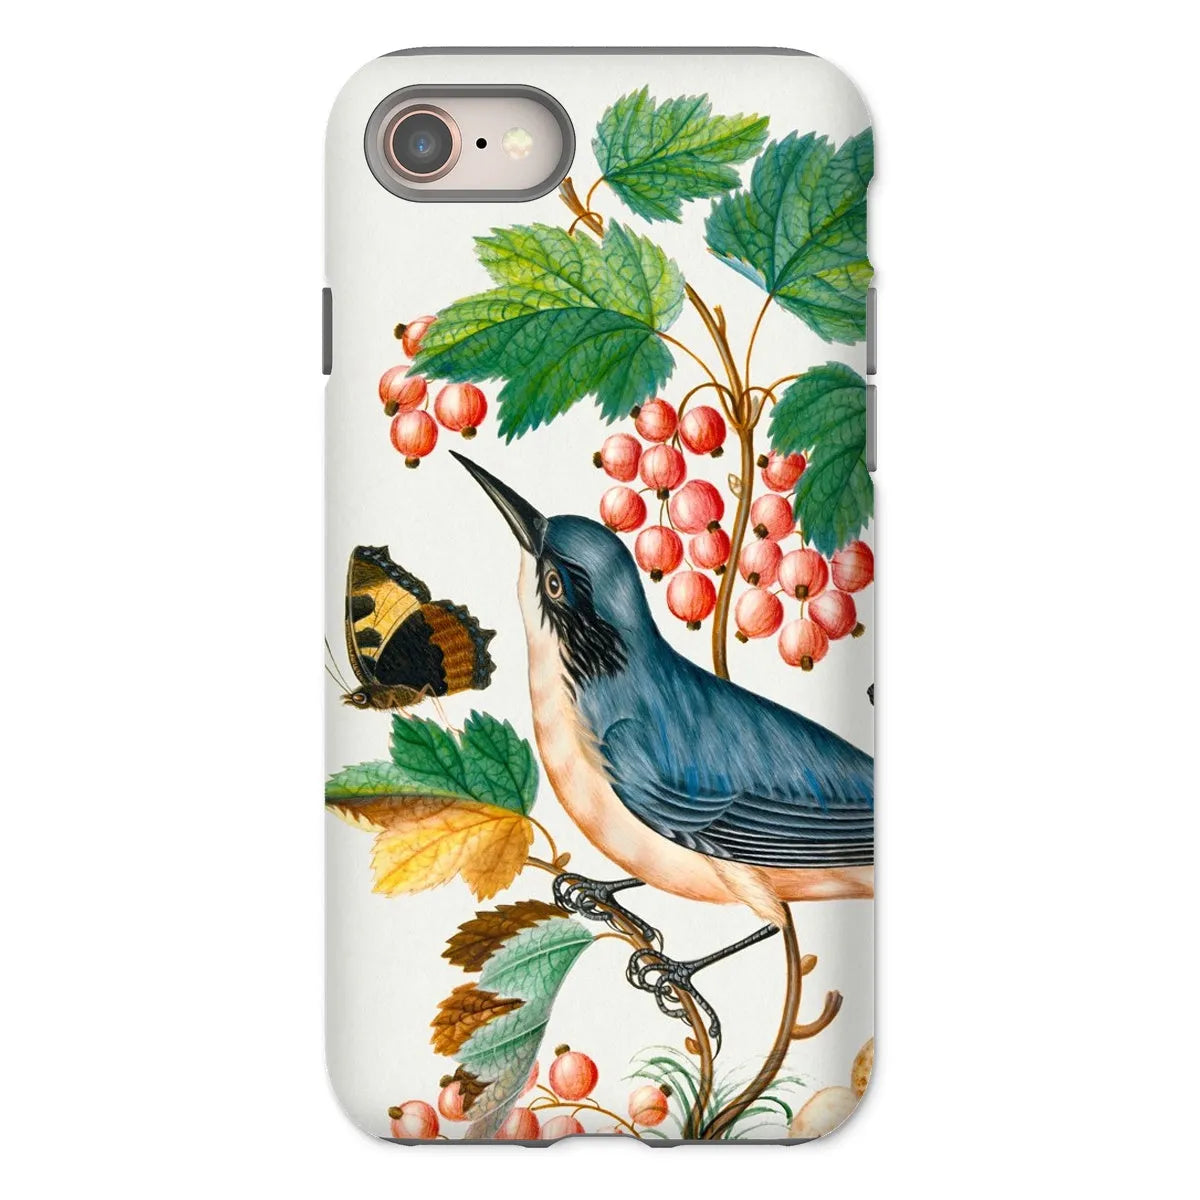 Warbler Admiral Wasps & Ants - Art Phone Case - James Bolton - Iphone 8 / Matte - Mobile Phone Cases - Aesthetic Art